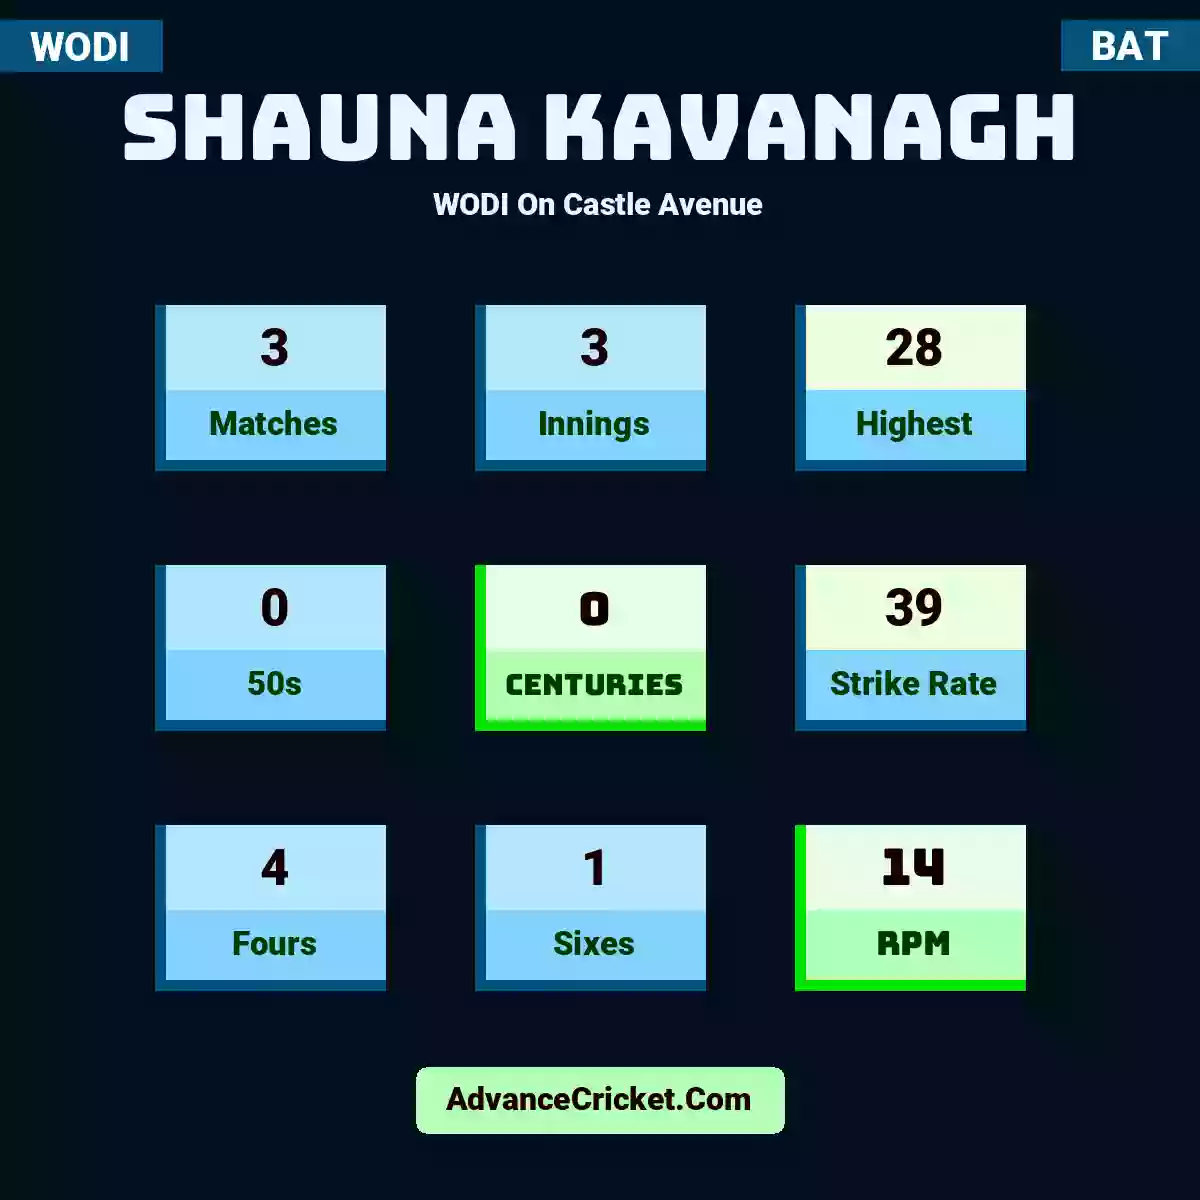 Shauna Kavanagh WODI  On Castle Avenue, Shauna Kavanagh played 3 matches, scored 28 runs as highest, 0 half-centuries, and 0 centuries, with a strike rate of 39. S.Kavanagh hit 4 fours and 1 sixes, with an RPM of 14.